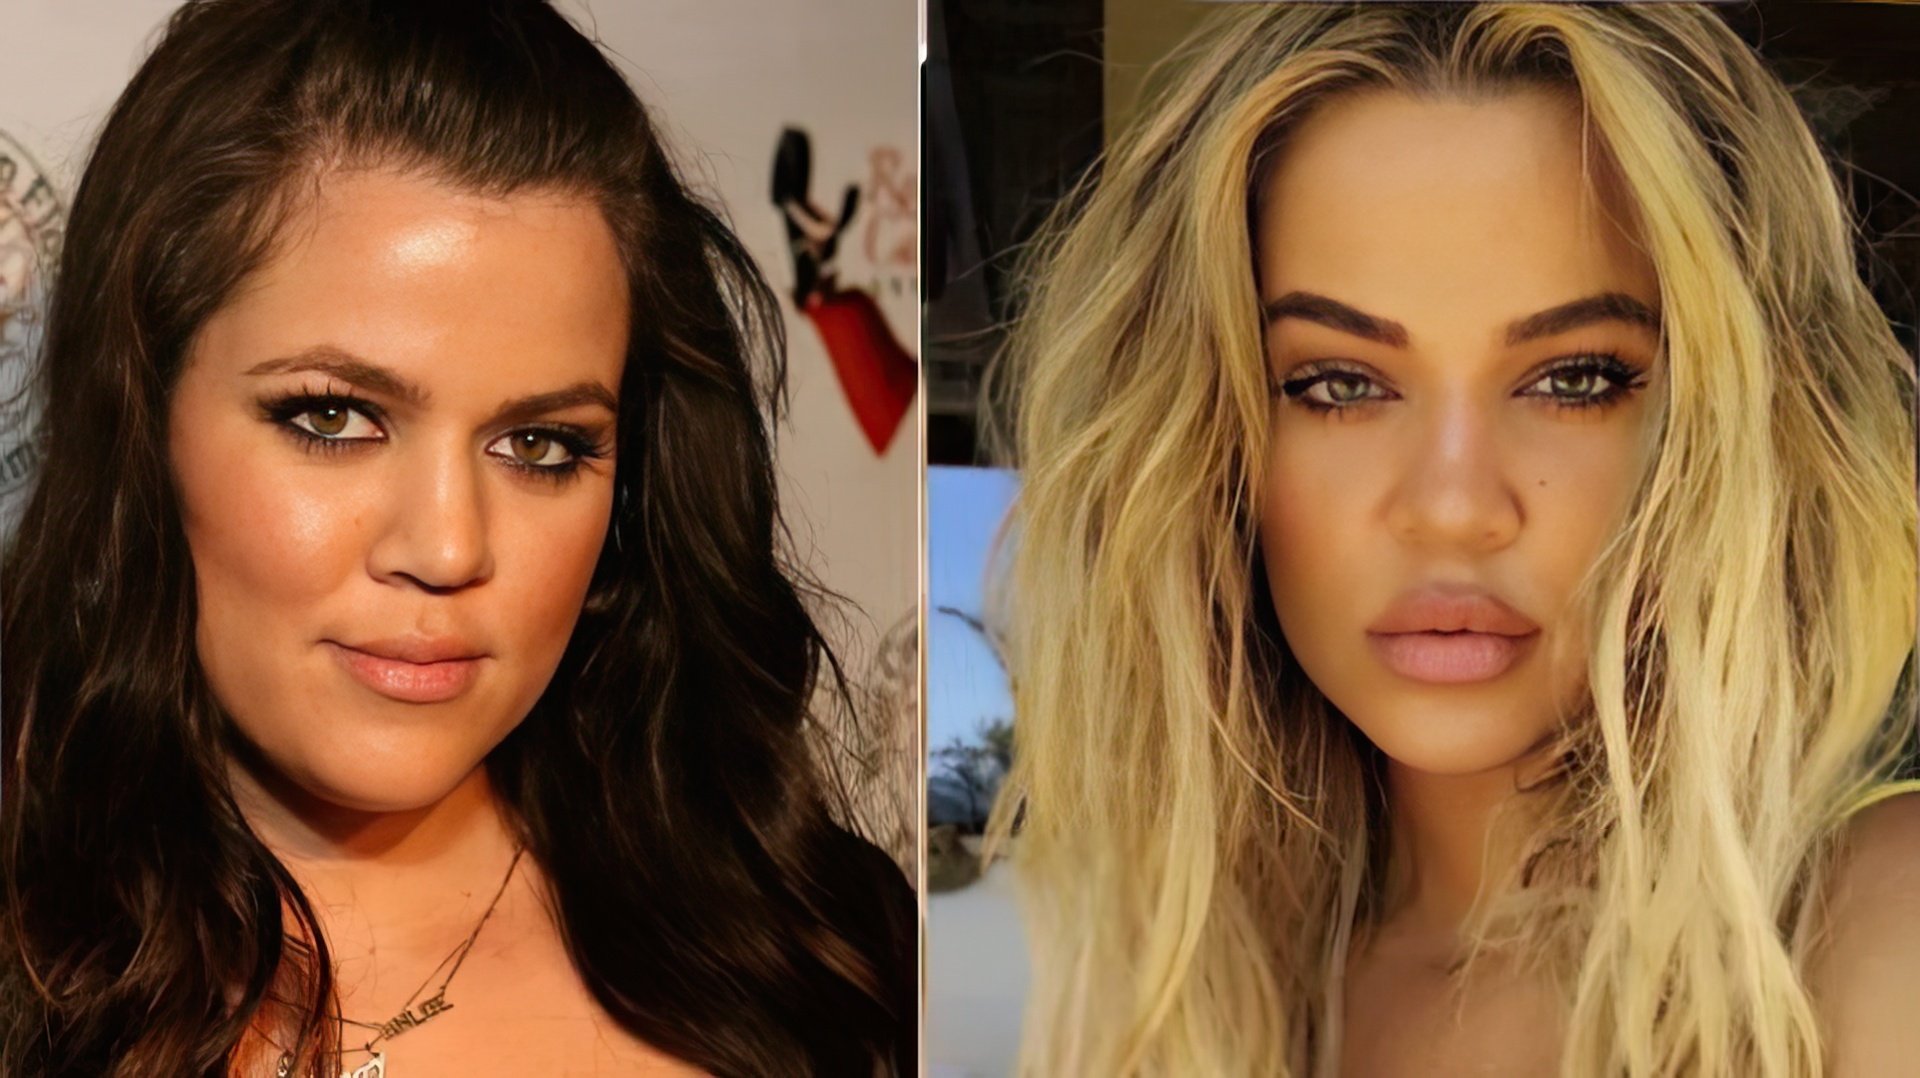 Khloé Kardashian: before and after the plastic surgery